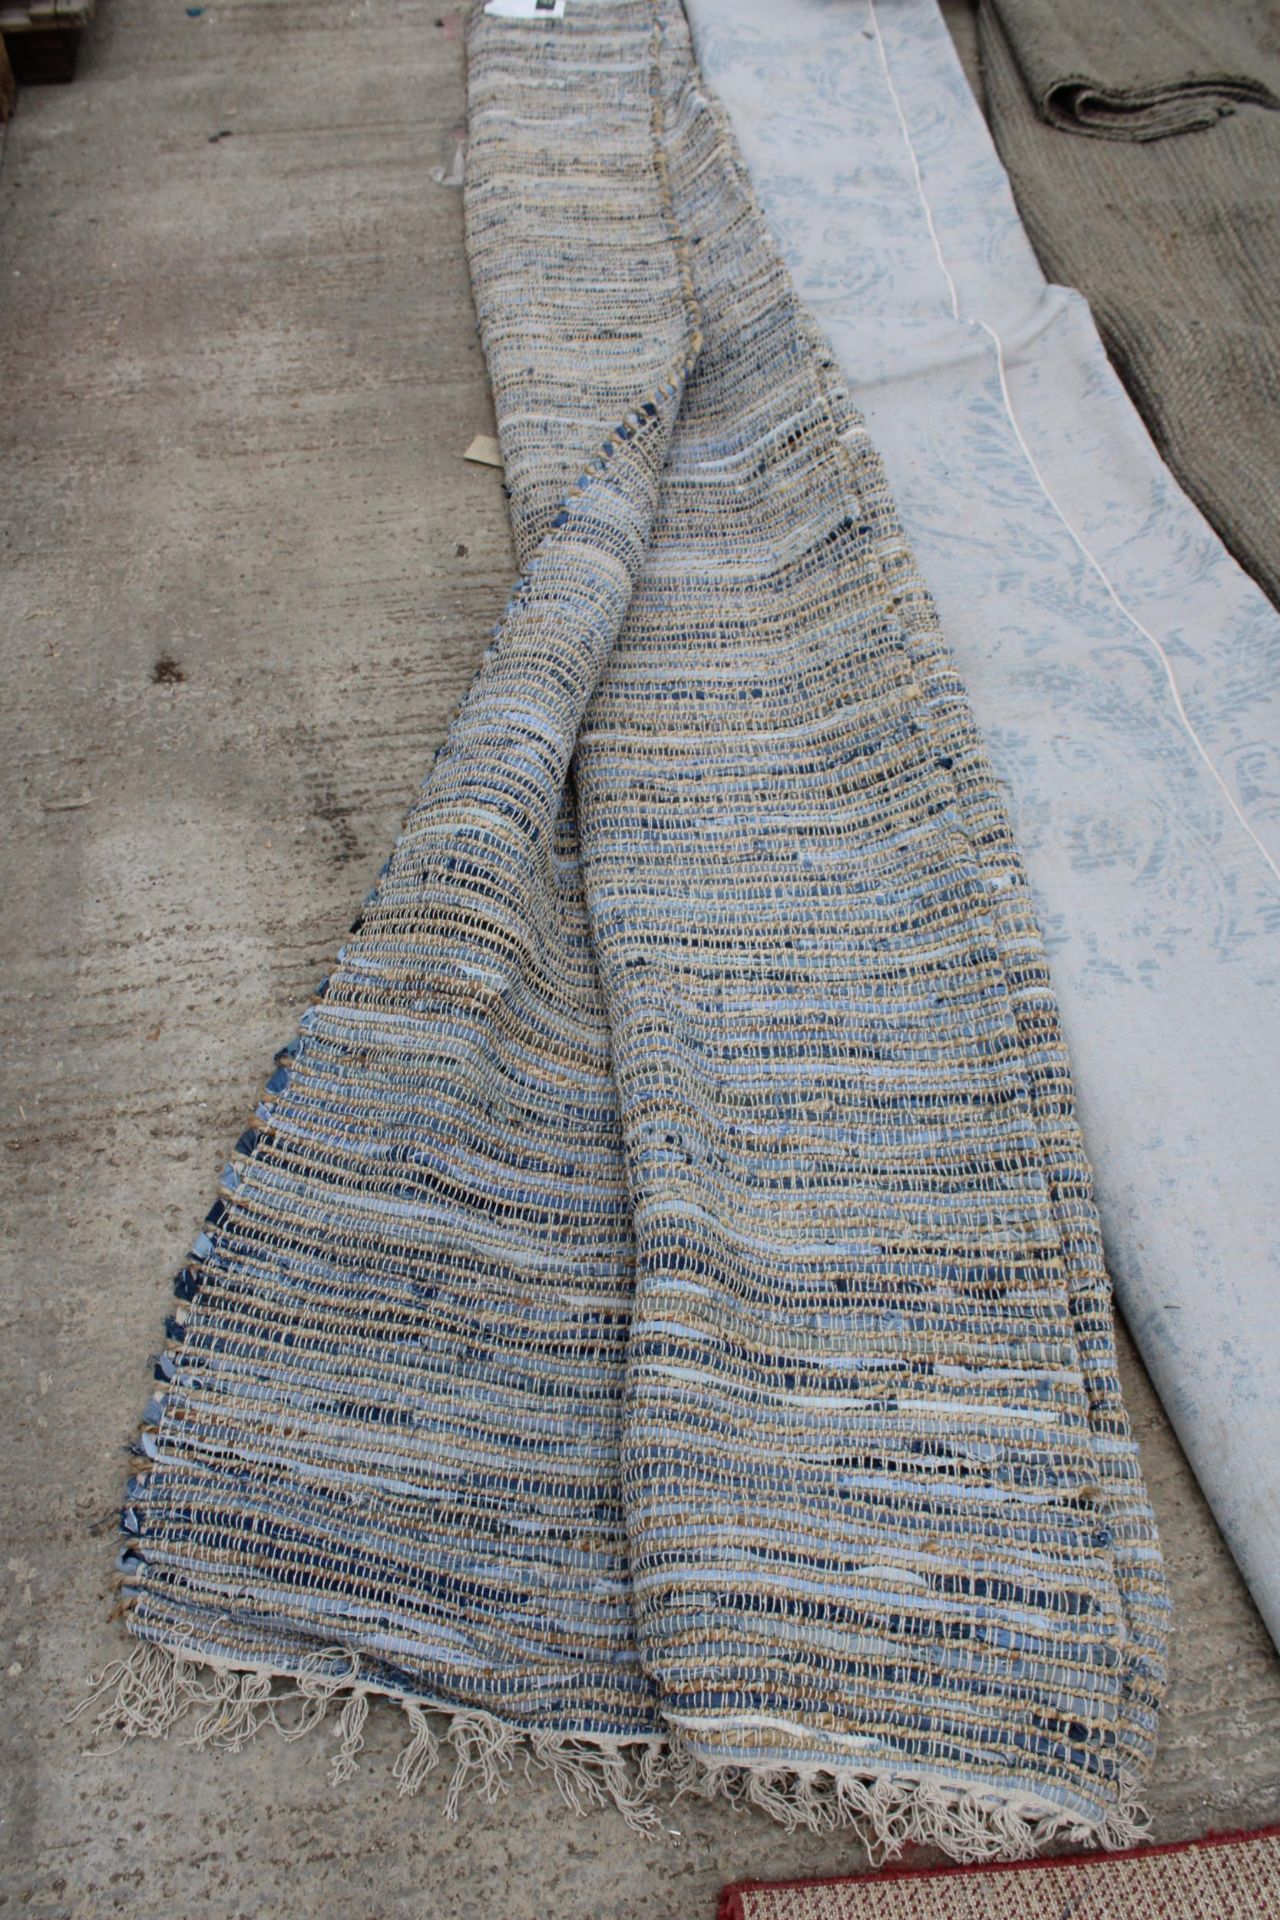 A BELIEVED AS NEW MADE IN INDIA HAND WOVEN NATURAL DENIM RUG (275CM x365CM) - Image 4 of 4